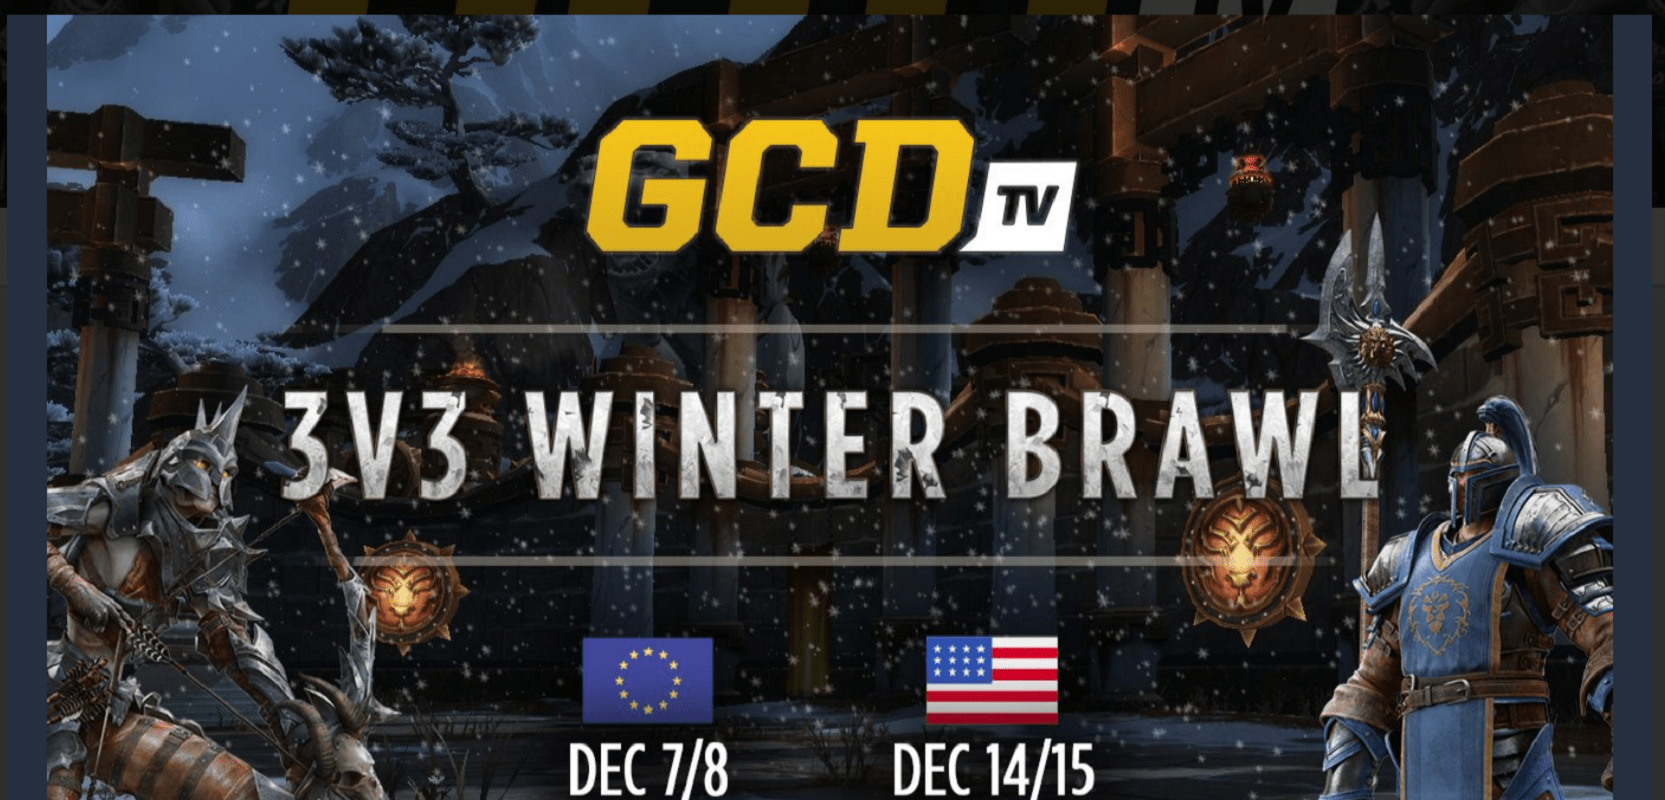 GCDTV 3v3 Winter Brawl Series Is Taking Place In December For World Of Warcraft: Battle For Azeroth PvP Players